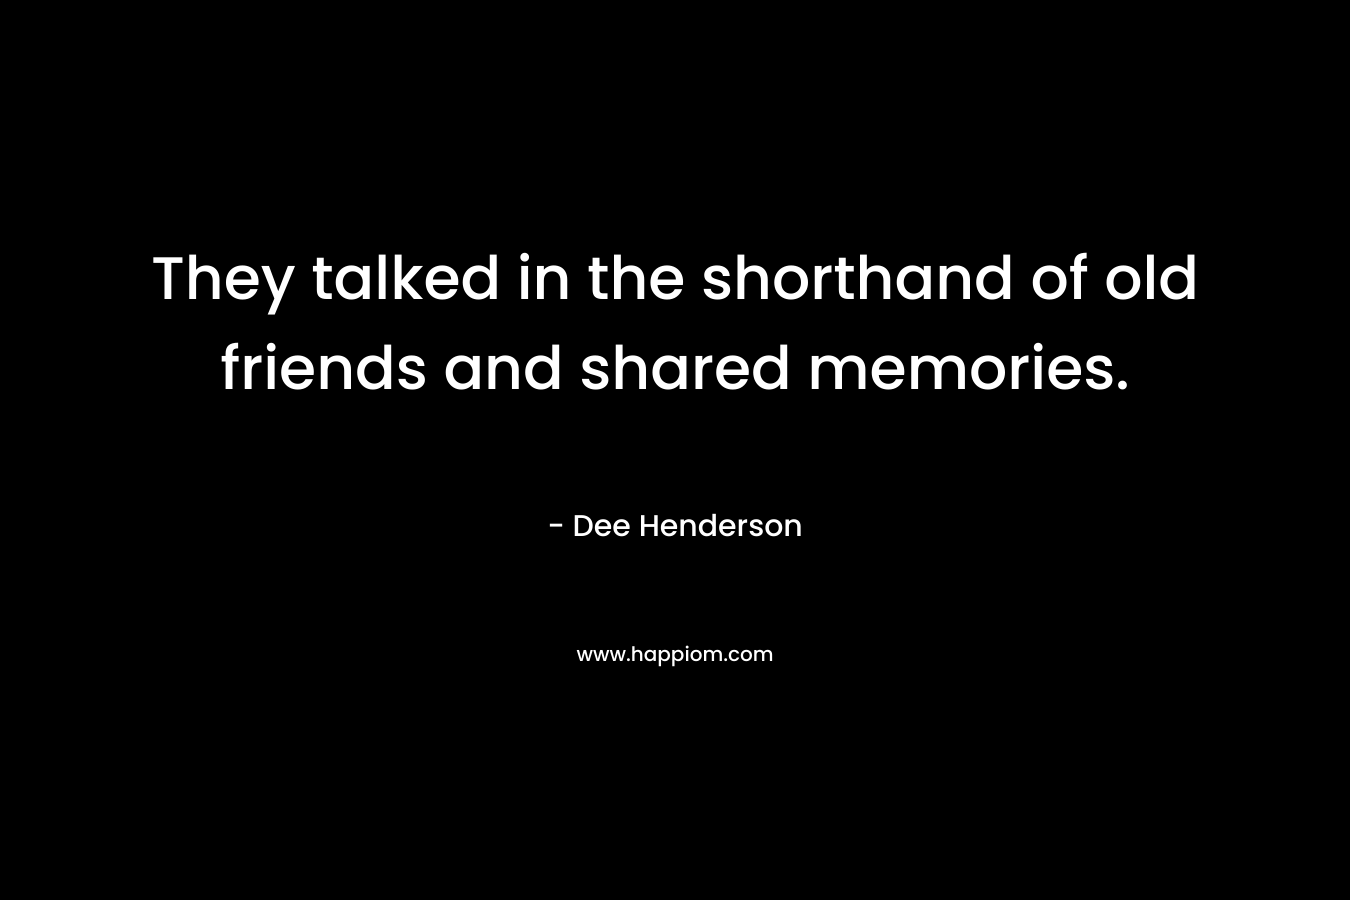 They talked in the shorthand of old friends and shared memories. – Dee Henderson